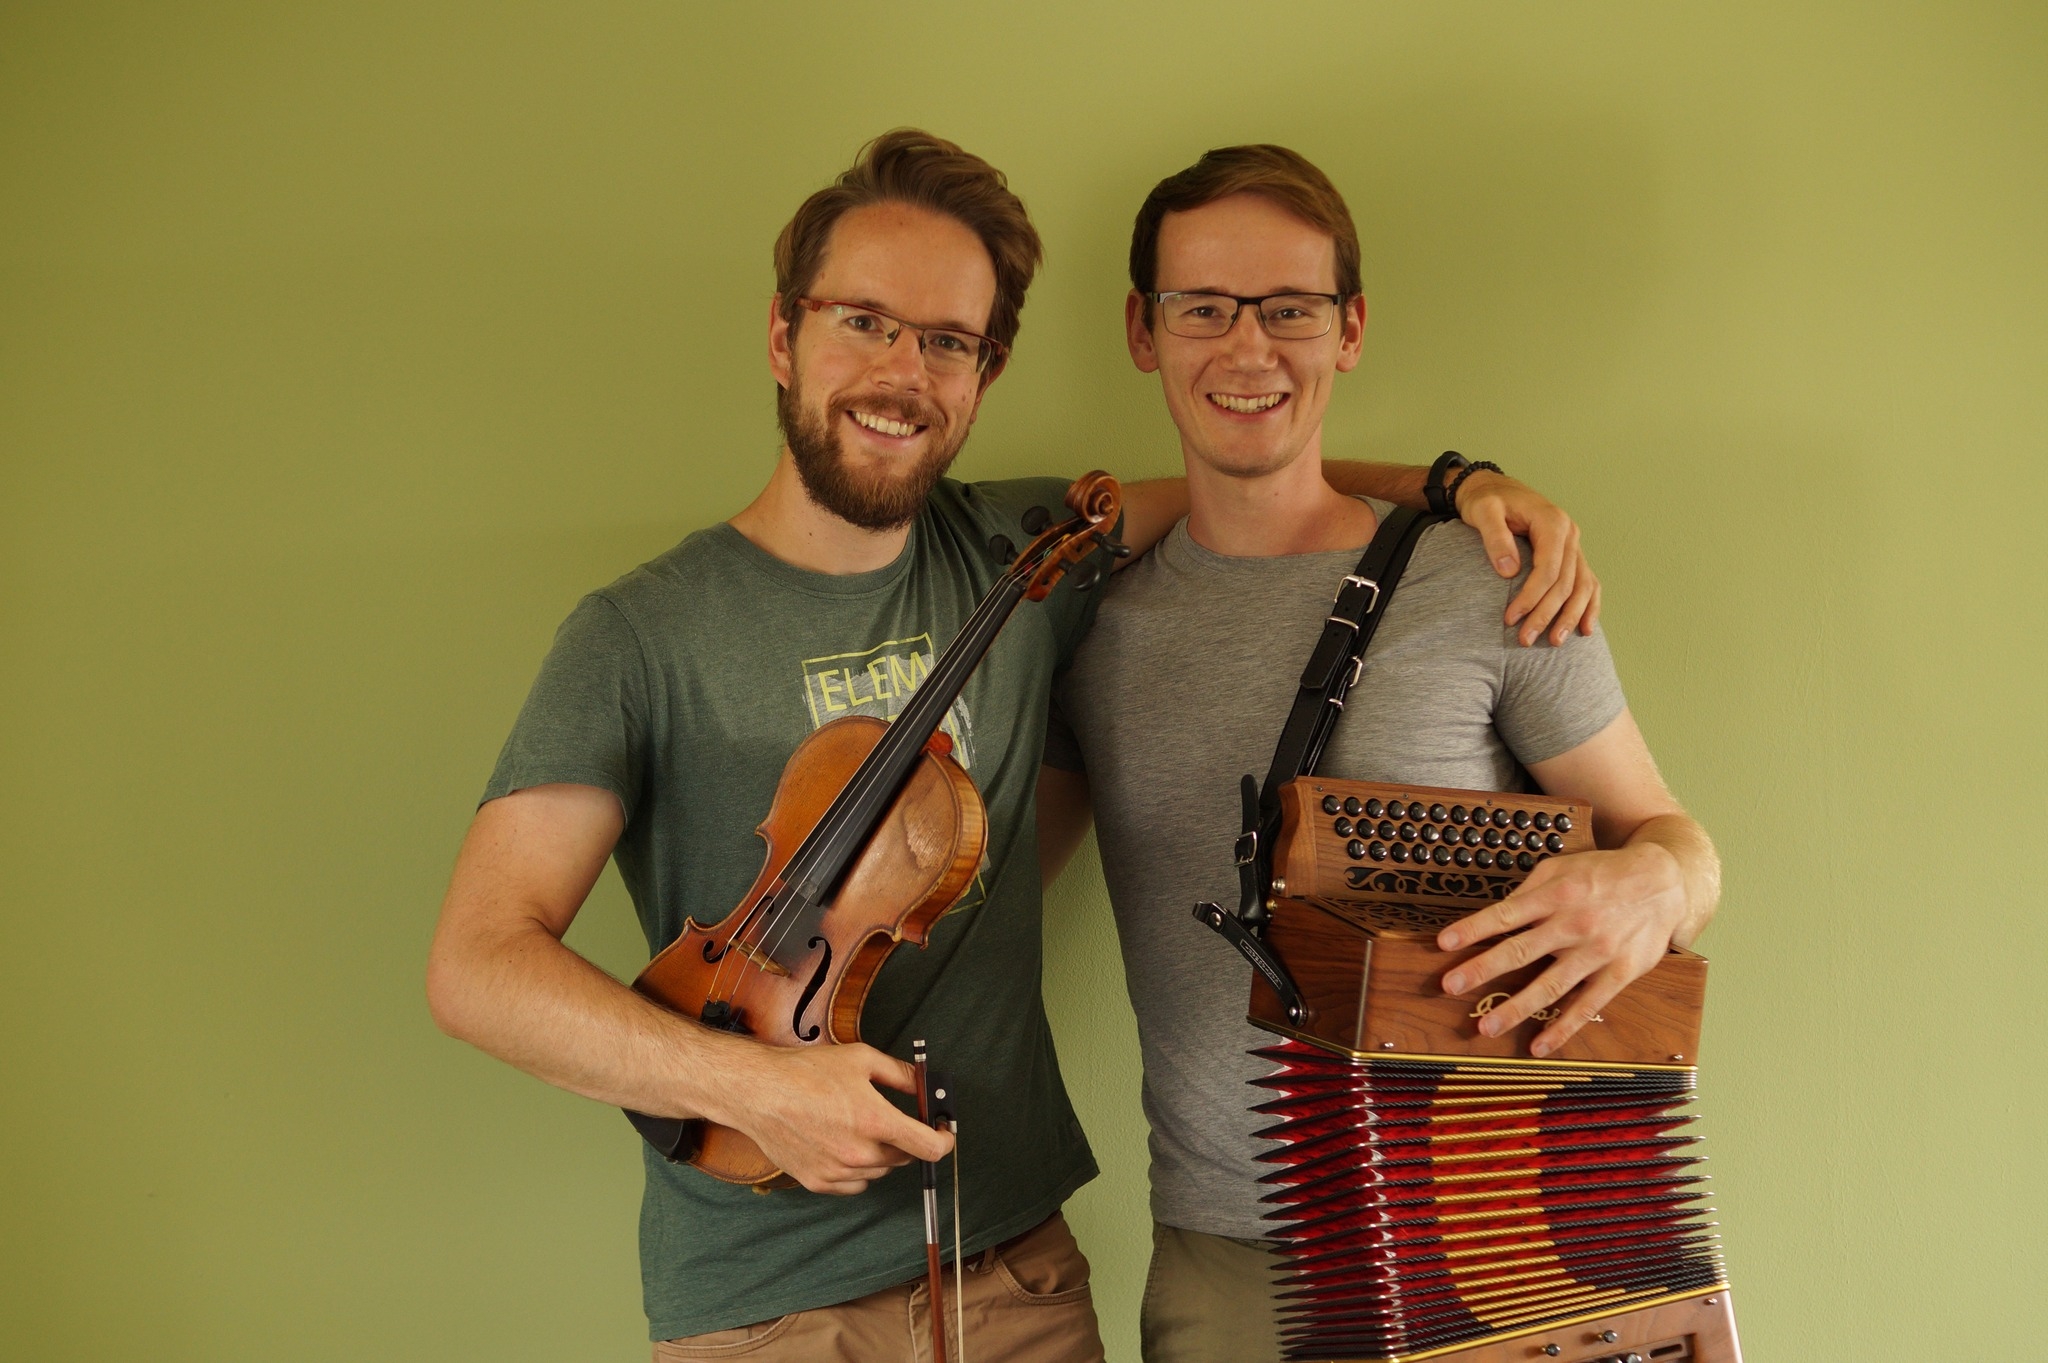 Bandpicture of Duo Clercx